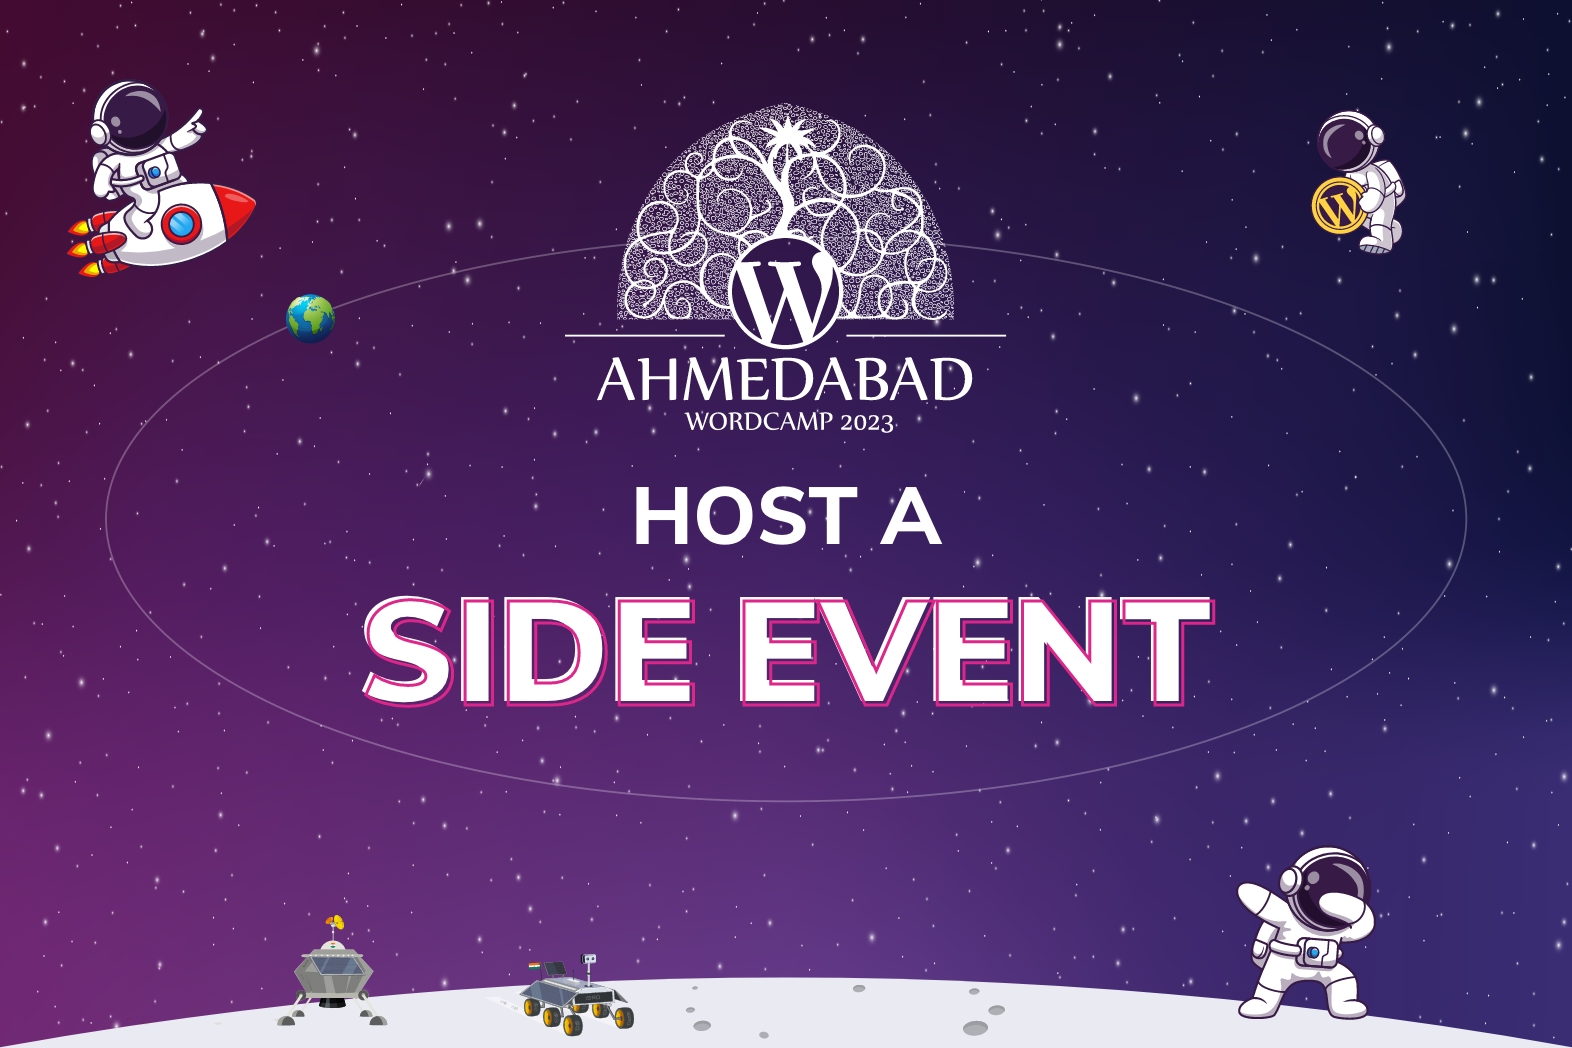 Are you planning to host a side event at WordCamp Ahmedabad 2023?